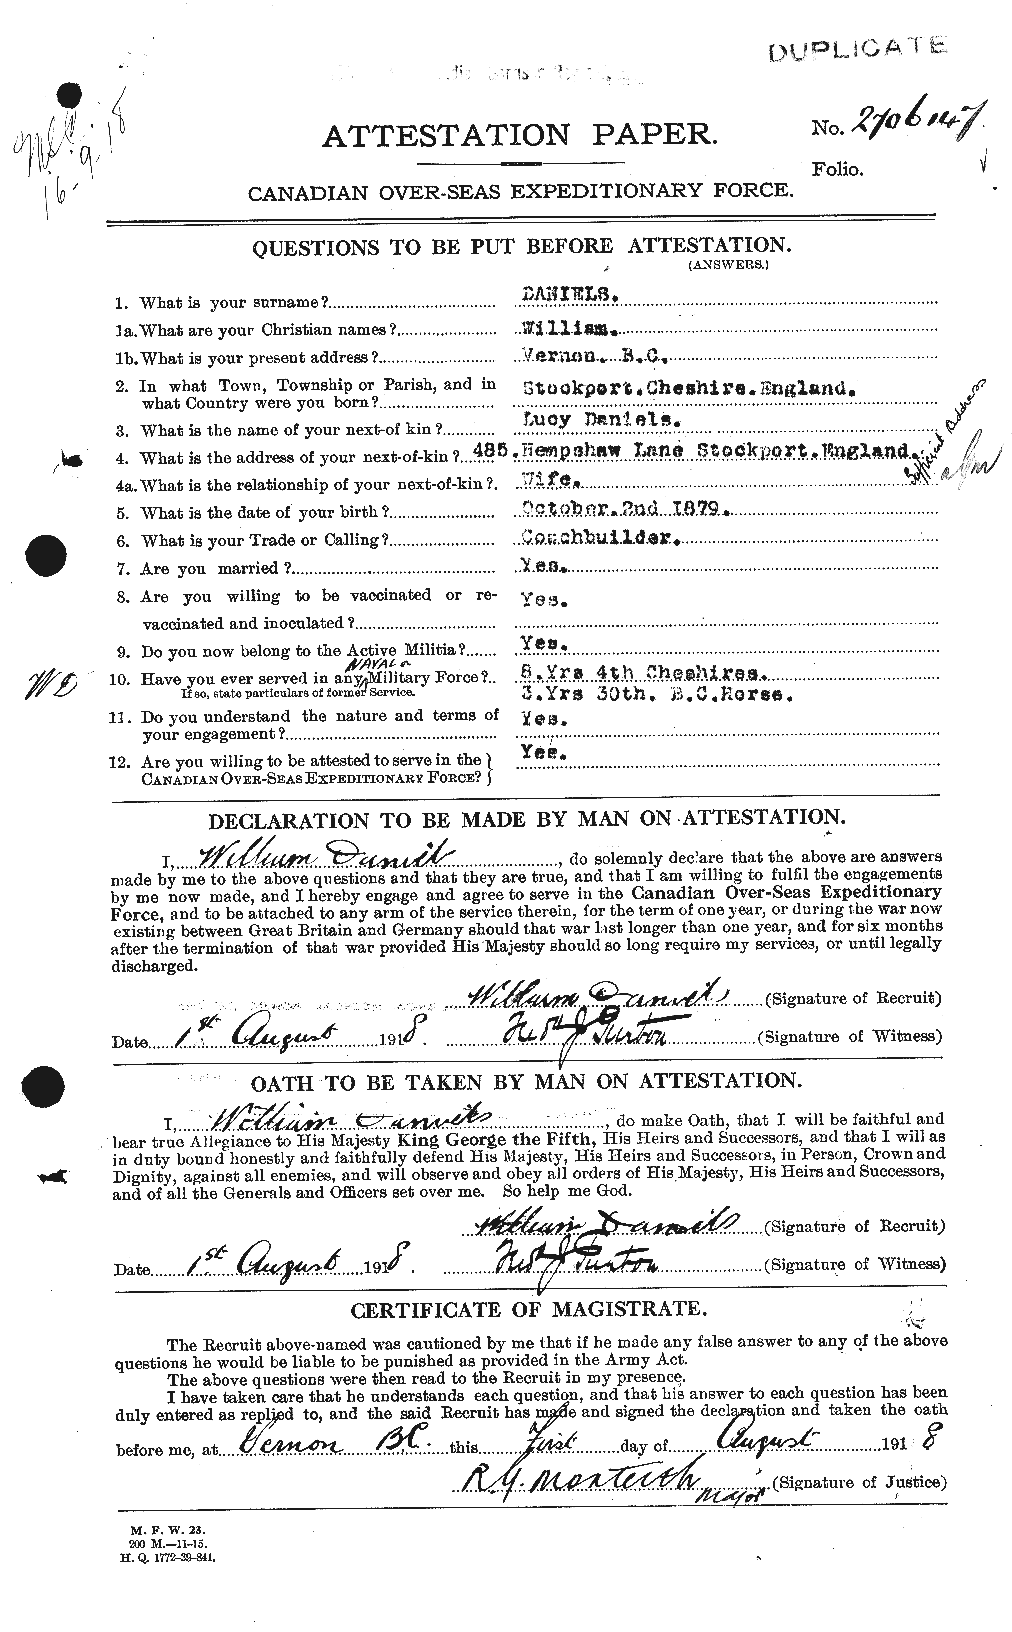 Personnel Records of the First World War - CEF 279689a